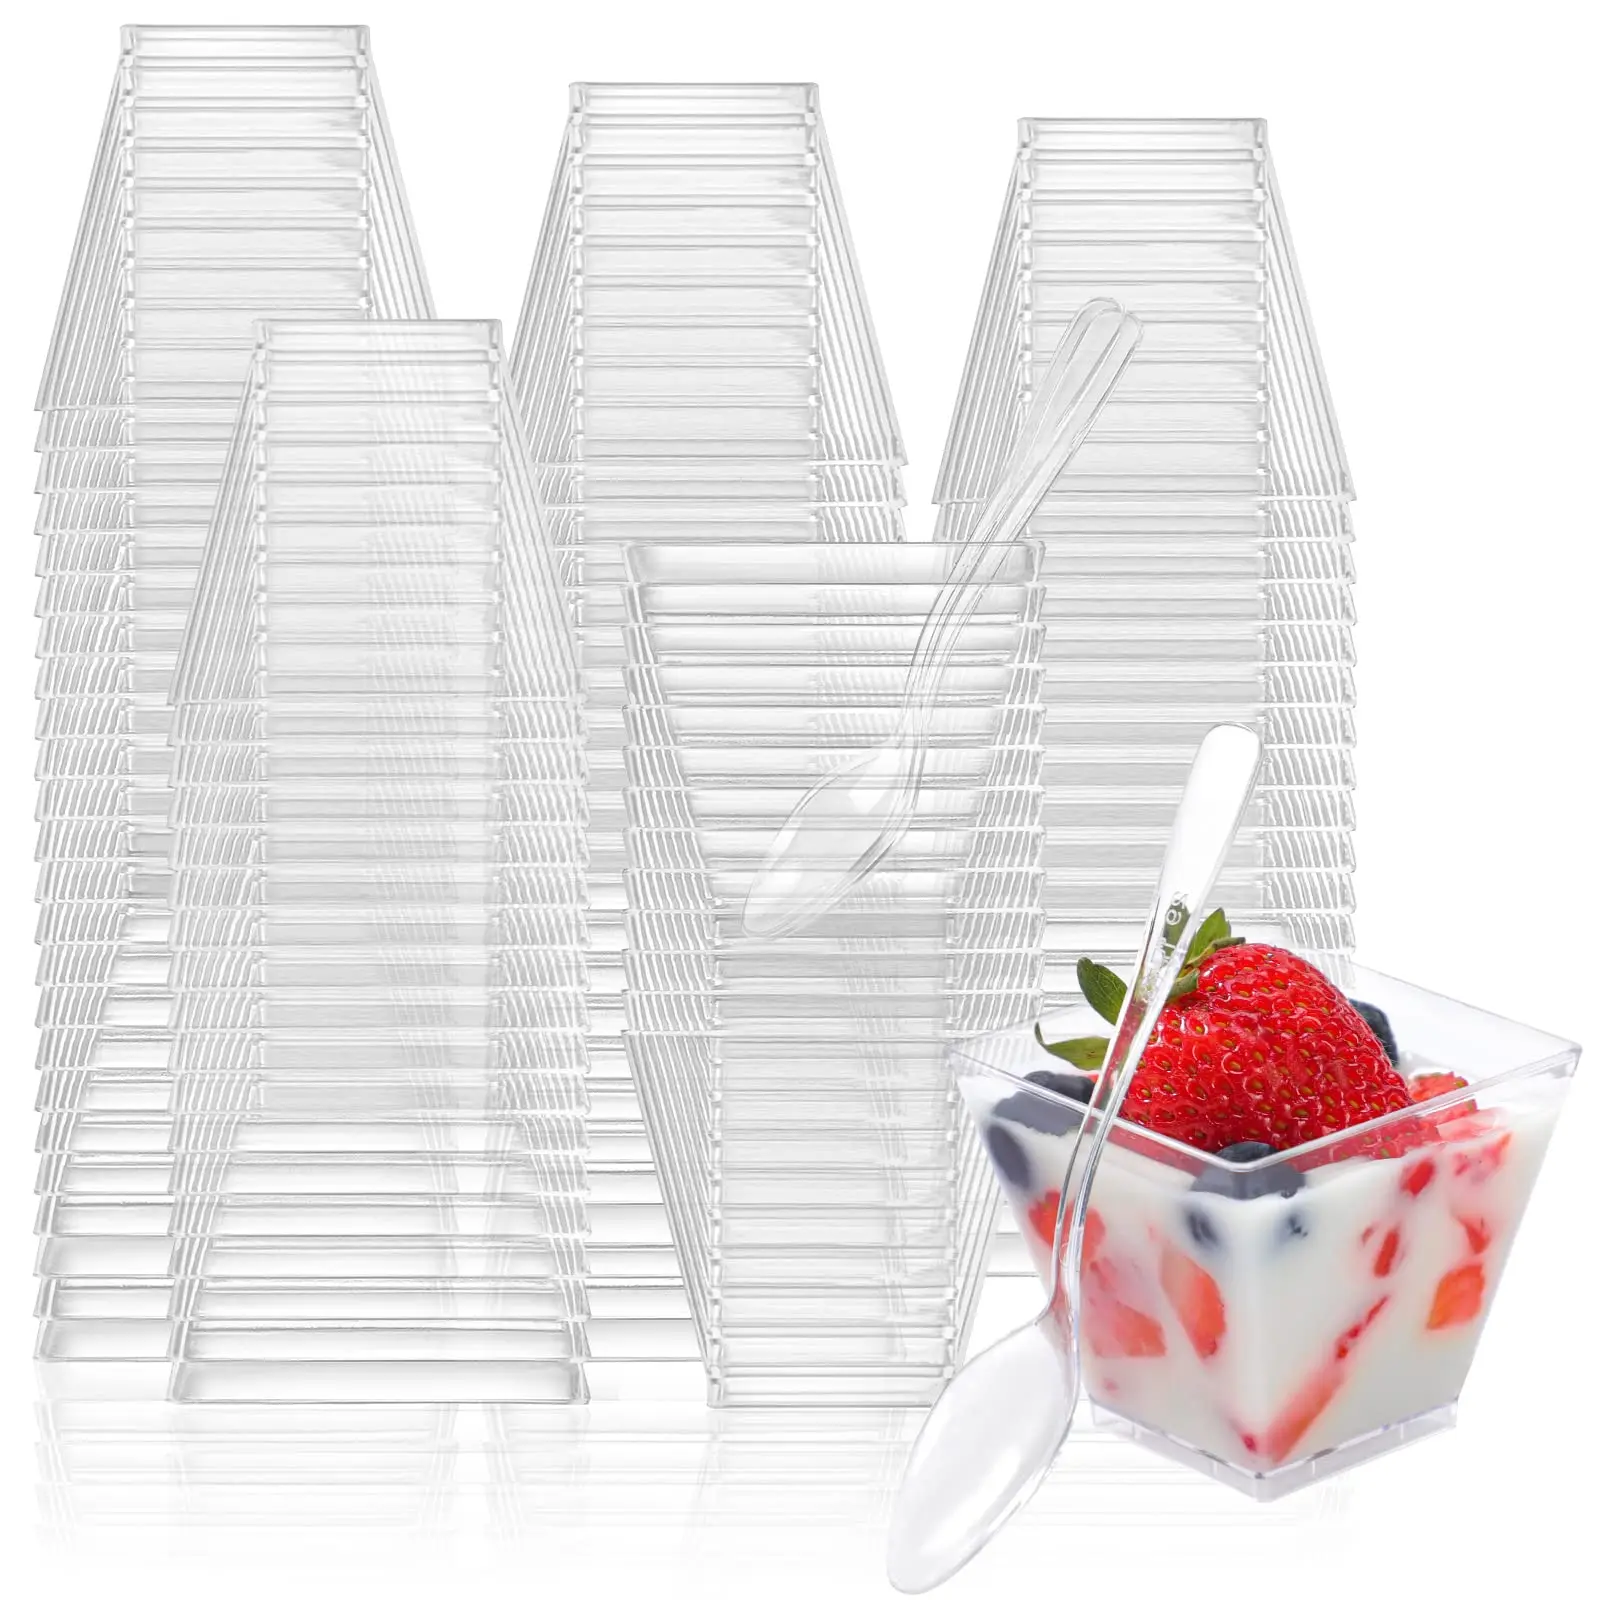 100Pack 2OZ Mini Dessert Cups for Party Small Plastic Dessert Cups for Kitchen Dessert Shooter Cups for Pudding Fruit Ice Cream